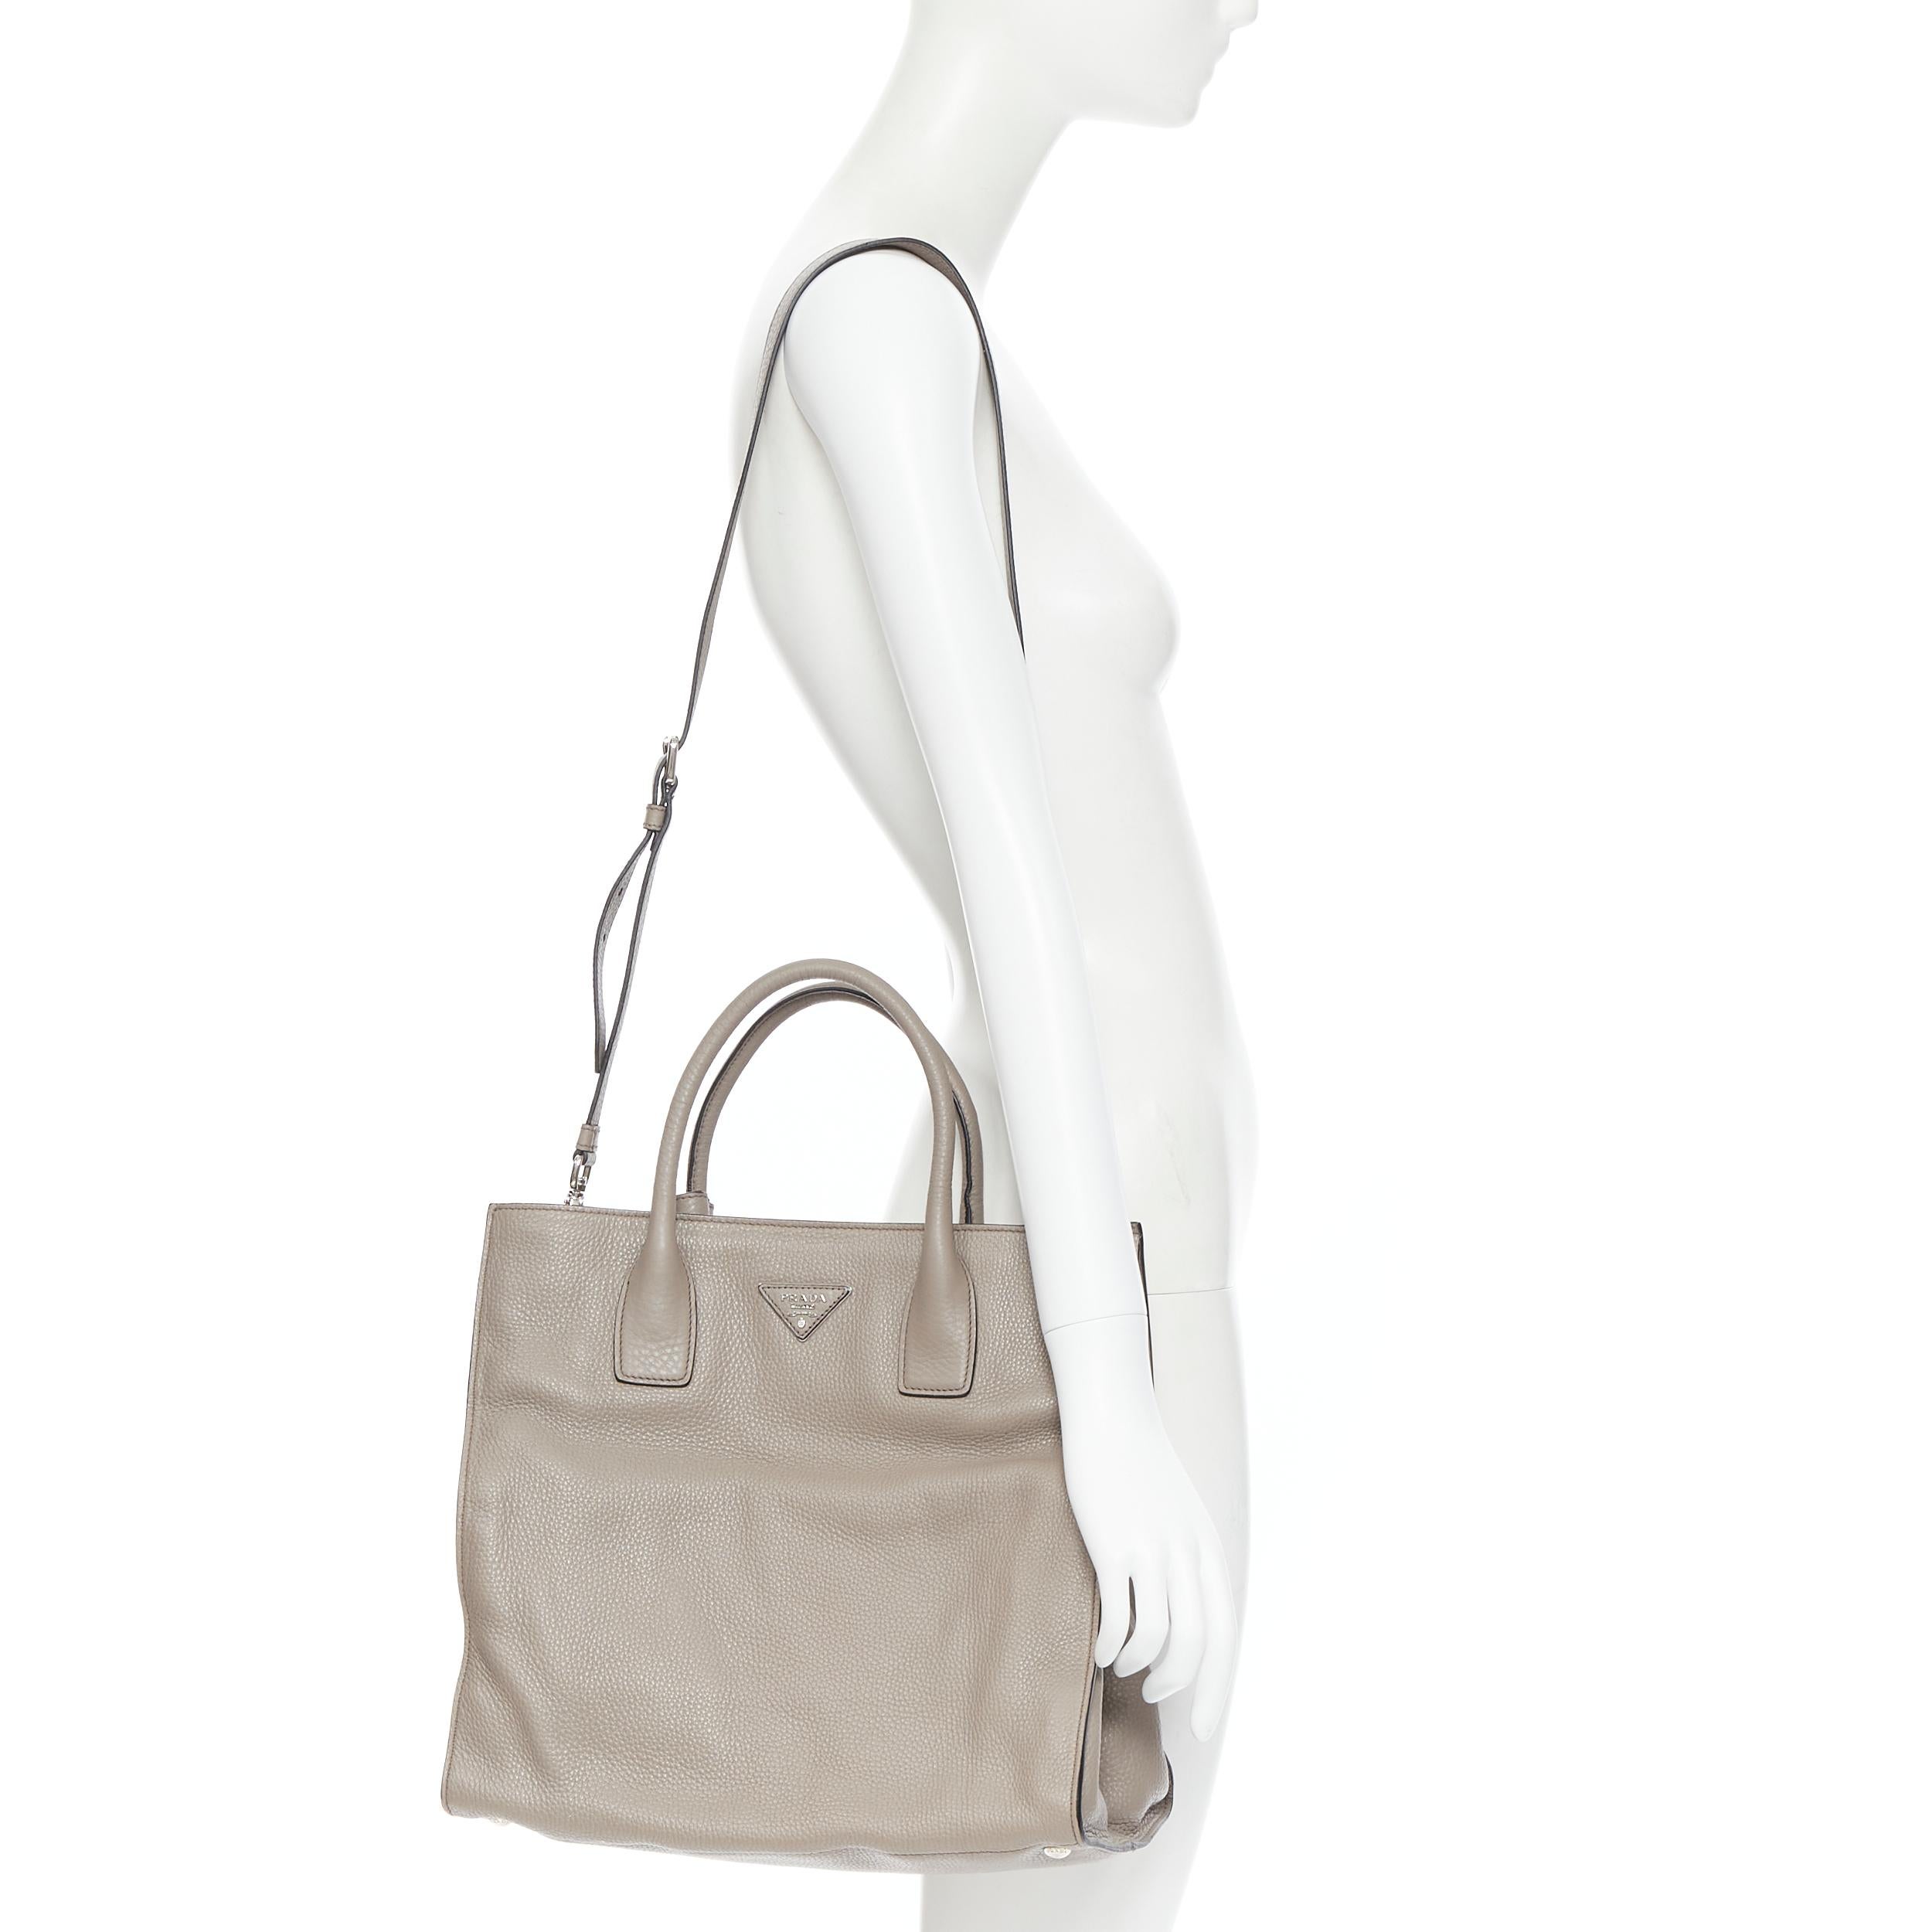 PRADA taupe grey grained leather triangle logo crossbody strap small tote bag 
Reference: PYCN/A00078 
Brand: Prada 
Designer: Miuccia Prada 
Model: Leather tote 
Material: Leather 
Color: Grey 
Pattern: Solid 
Closure: Zip 
Extra Detail: Grainy